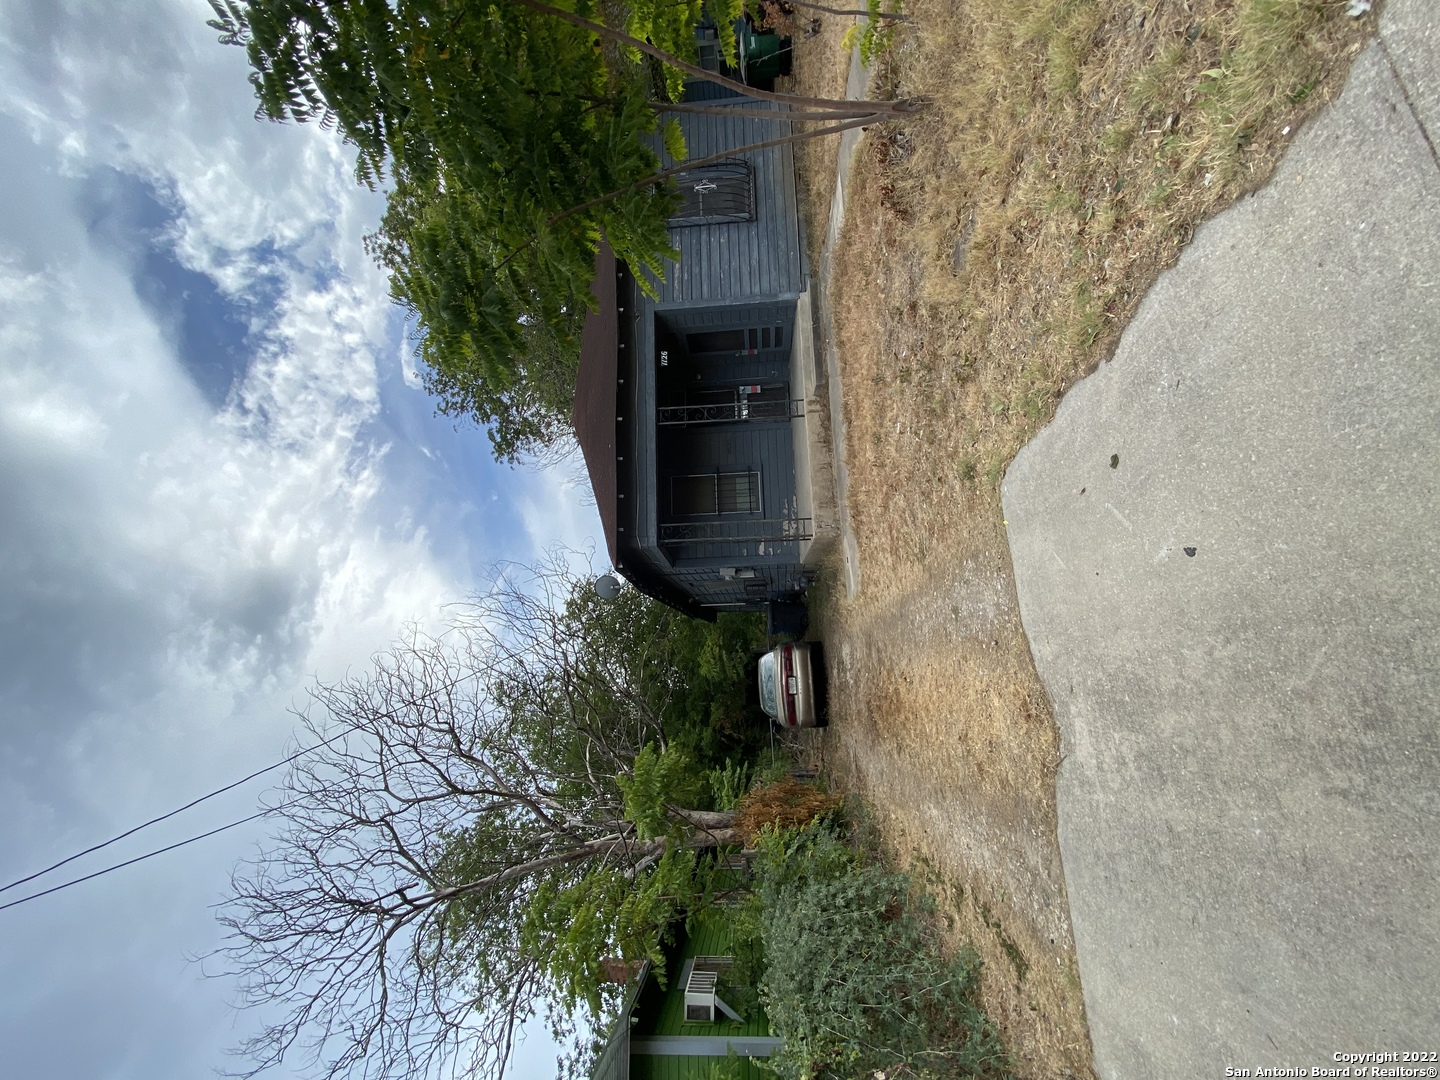 This house has enormous potential for investors. Cute 2 bedrooms one bath, living and kitchen could be lovely home close to downtown in fashionable area, a diamond in the raw.